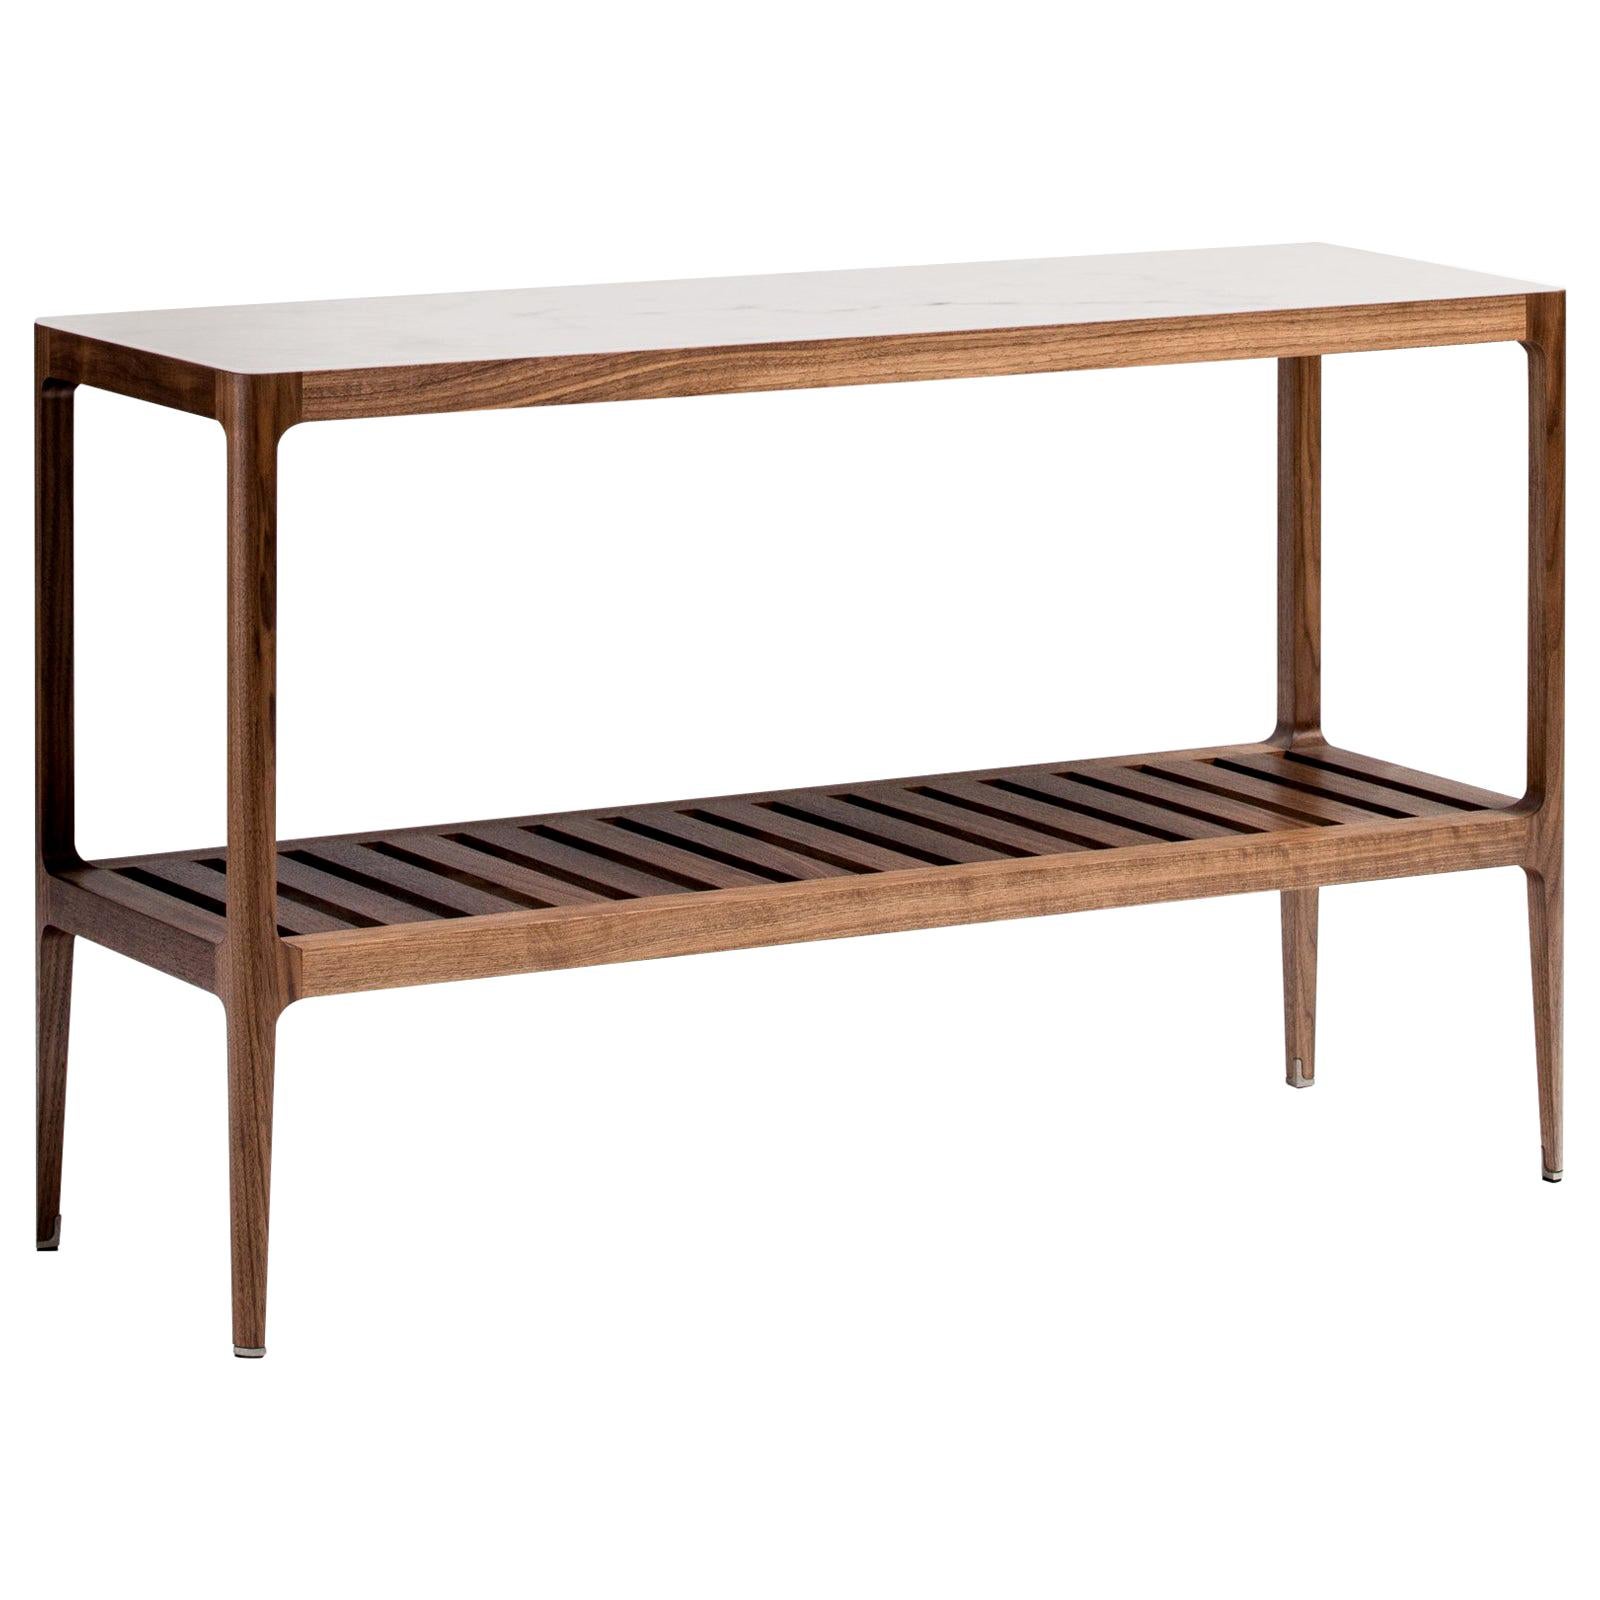 Walnut Radius Console Table with Slatted Shelf by Munson Furniture For Sale